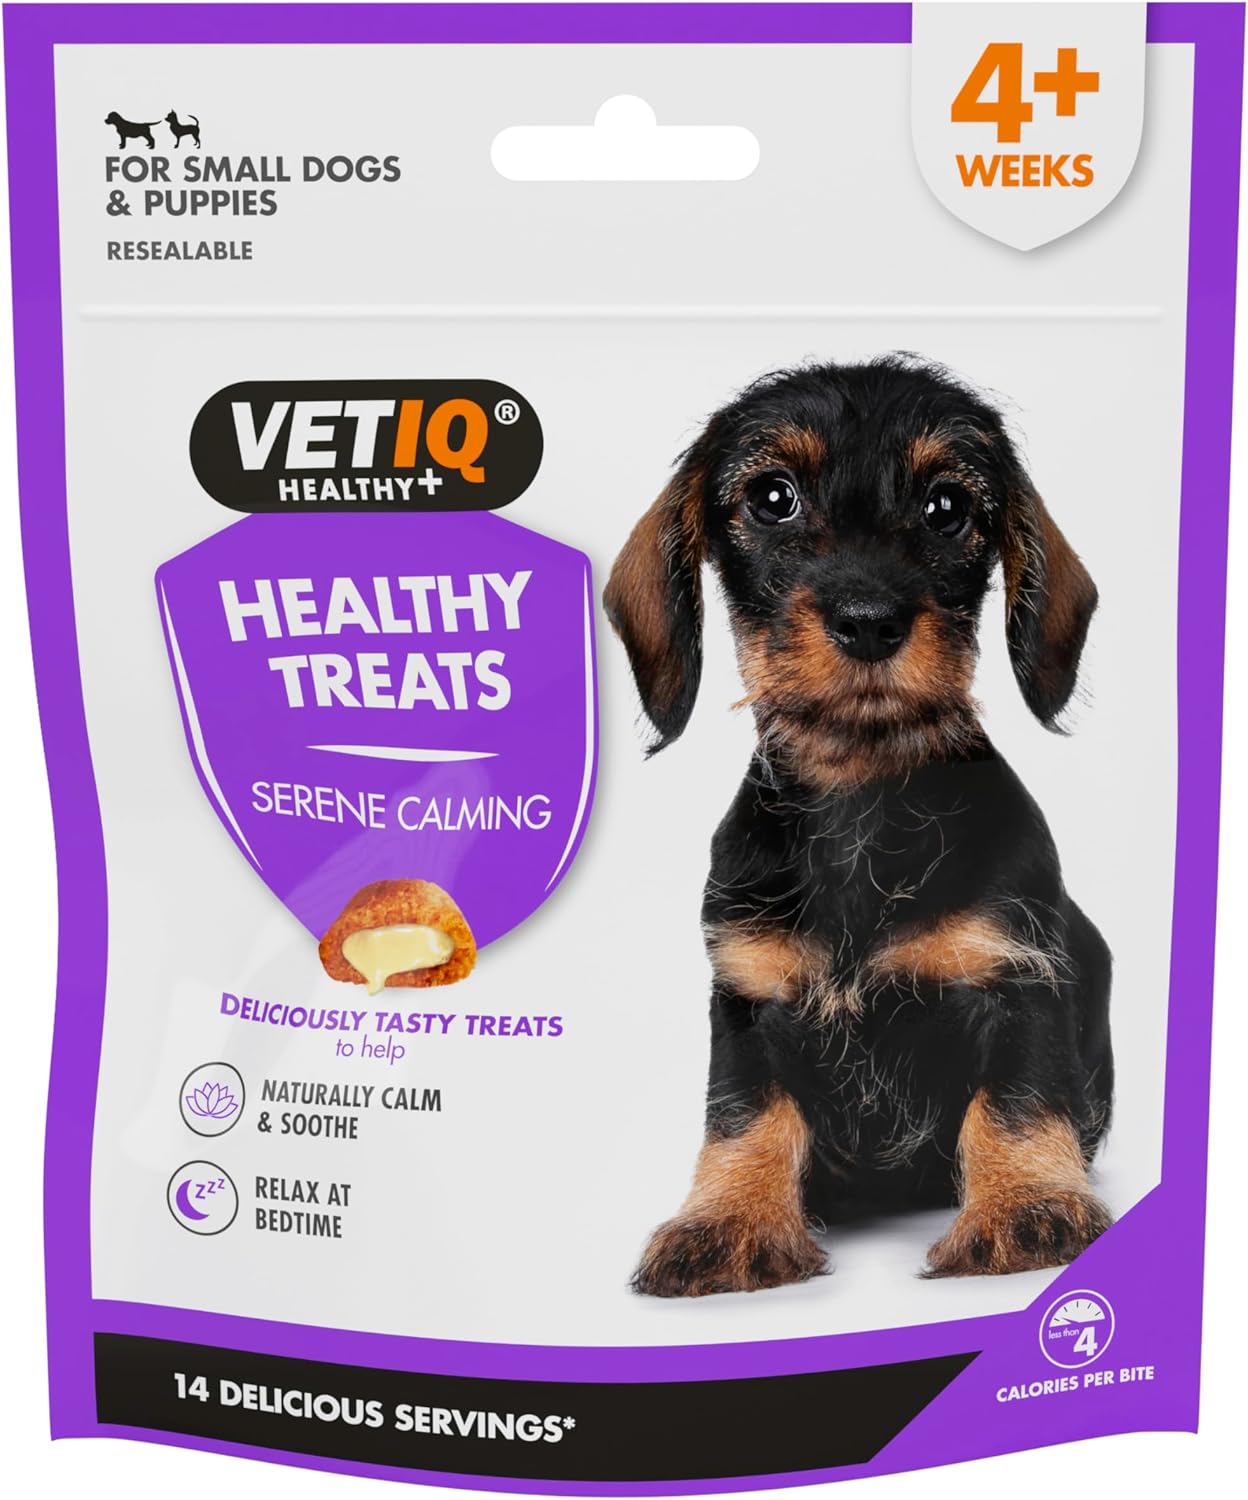 VETIQ Healthy Treats Serene Calming For Small Dogs & Puppies, Tasty Treats to Help Naturally Calm, Soothe & Relax Dogs at Bedtime, 50 g (Pack of 6)?5894